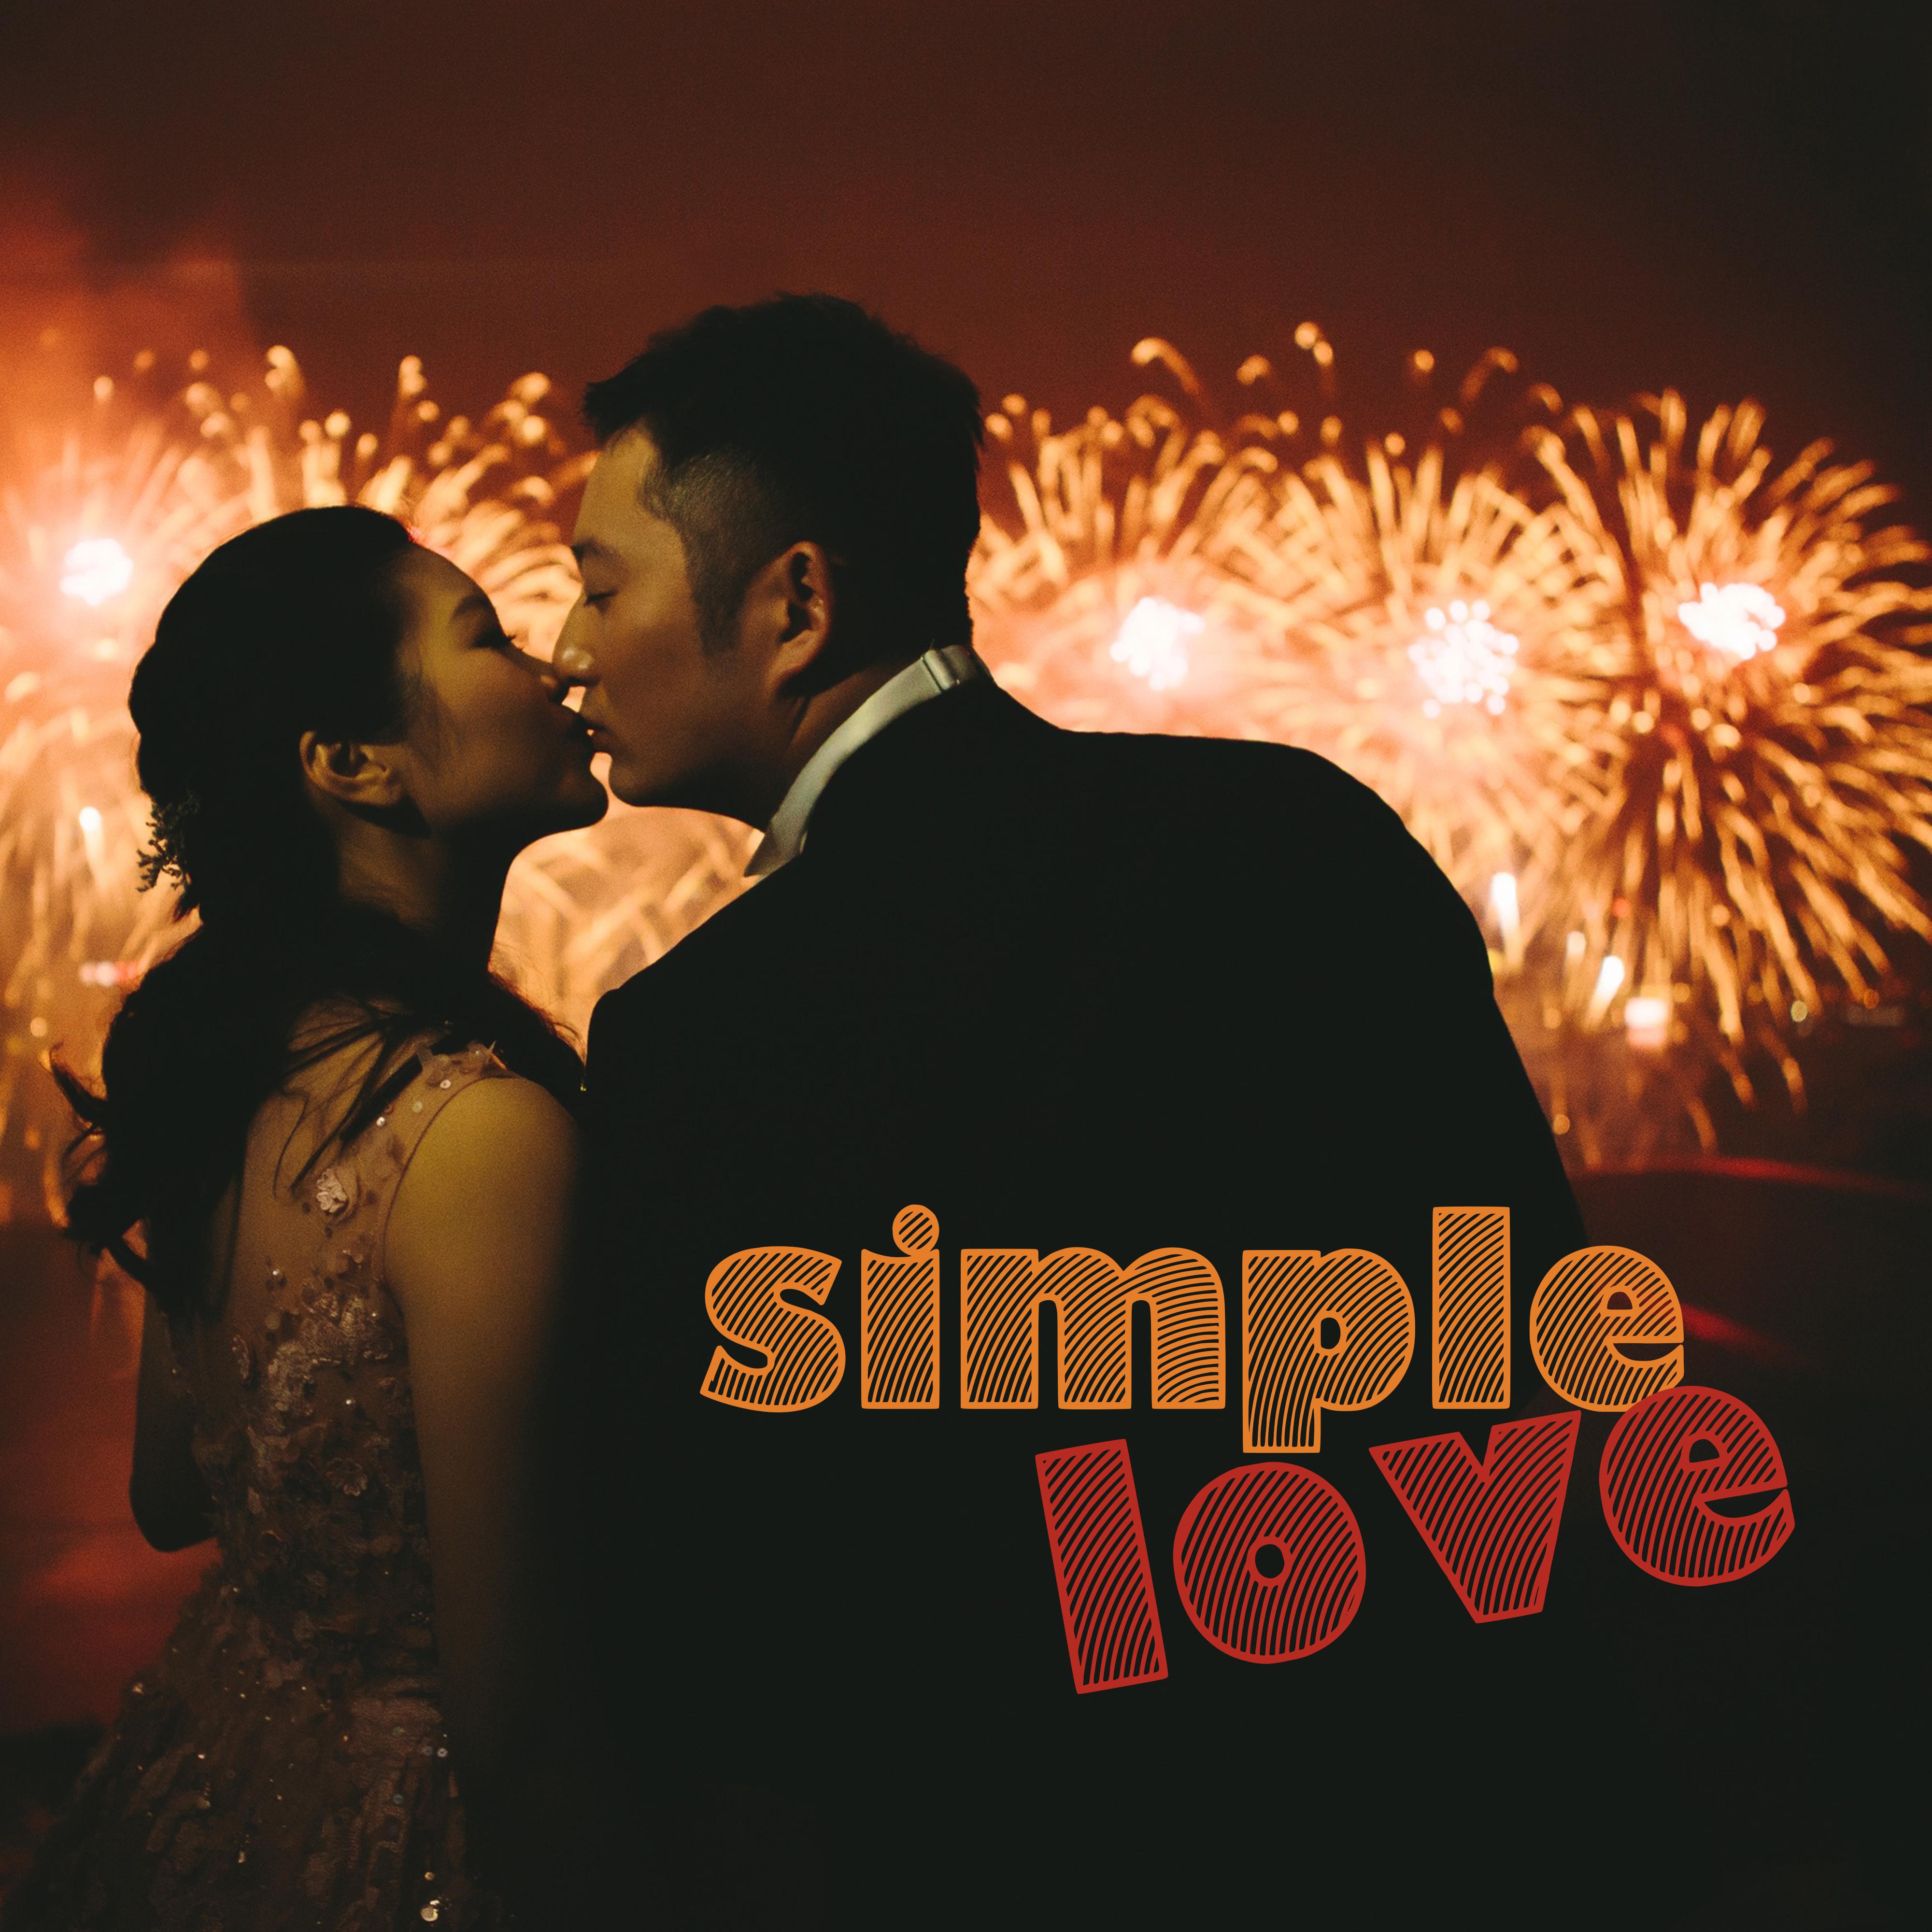 Simple Love – Romantic Jazz Music, Soft Jazz for Lovers, Dinner by Candlelight, Deep Relaxation, Piano Music, Sensual Melodies